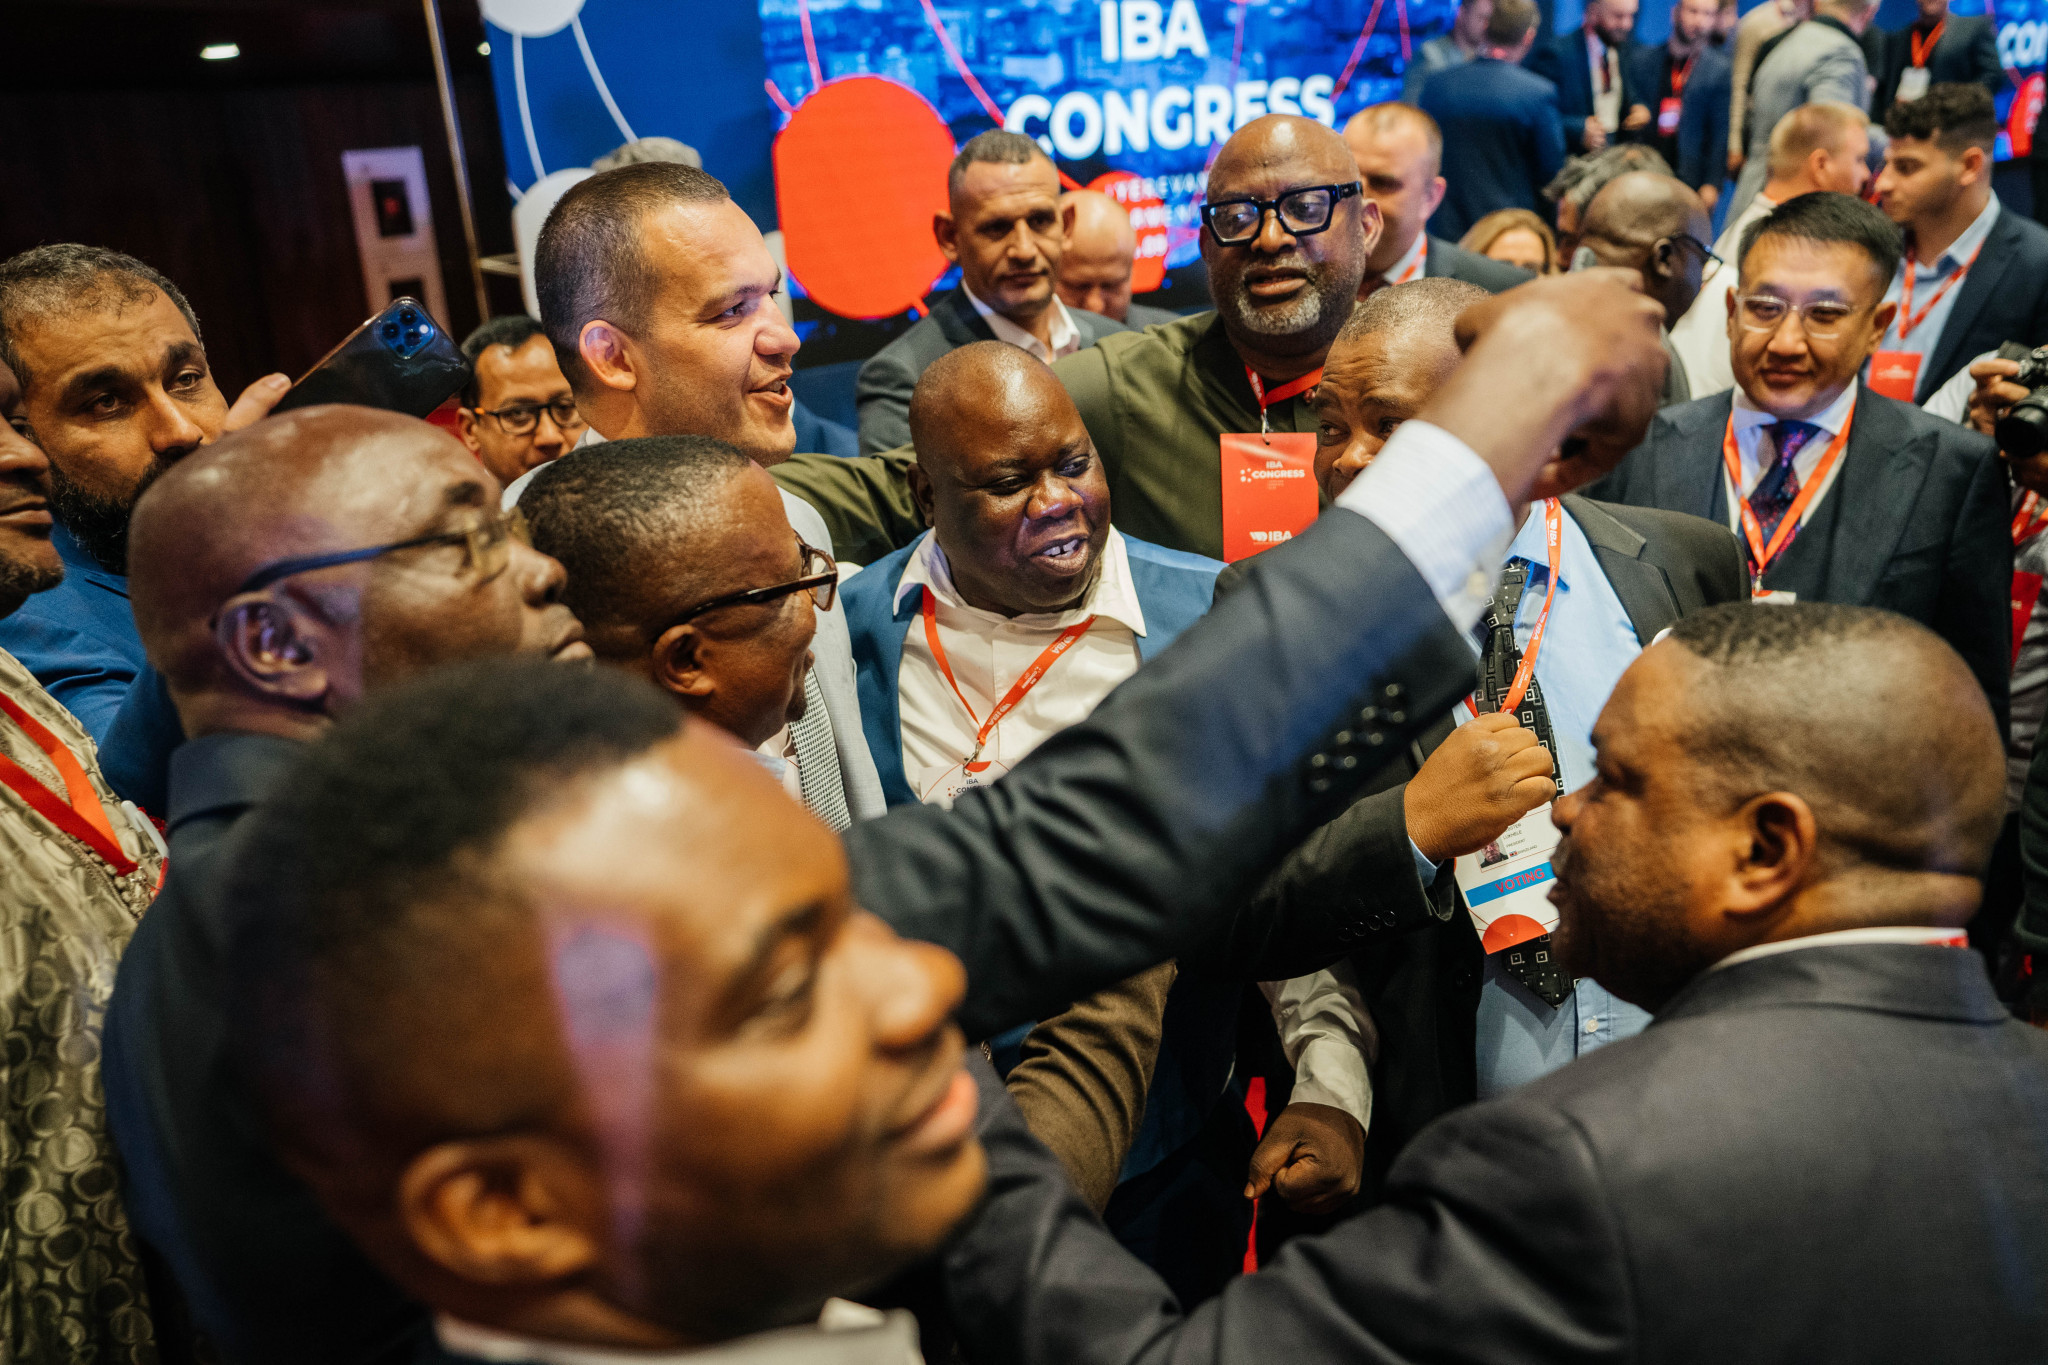 Dutch Boxing Federation President Boris van der Vorst has claimed that African countries were bribed on the eve of the IBA Extraordinary Congress in Yerevan last year ©IBA